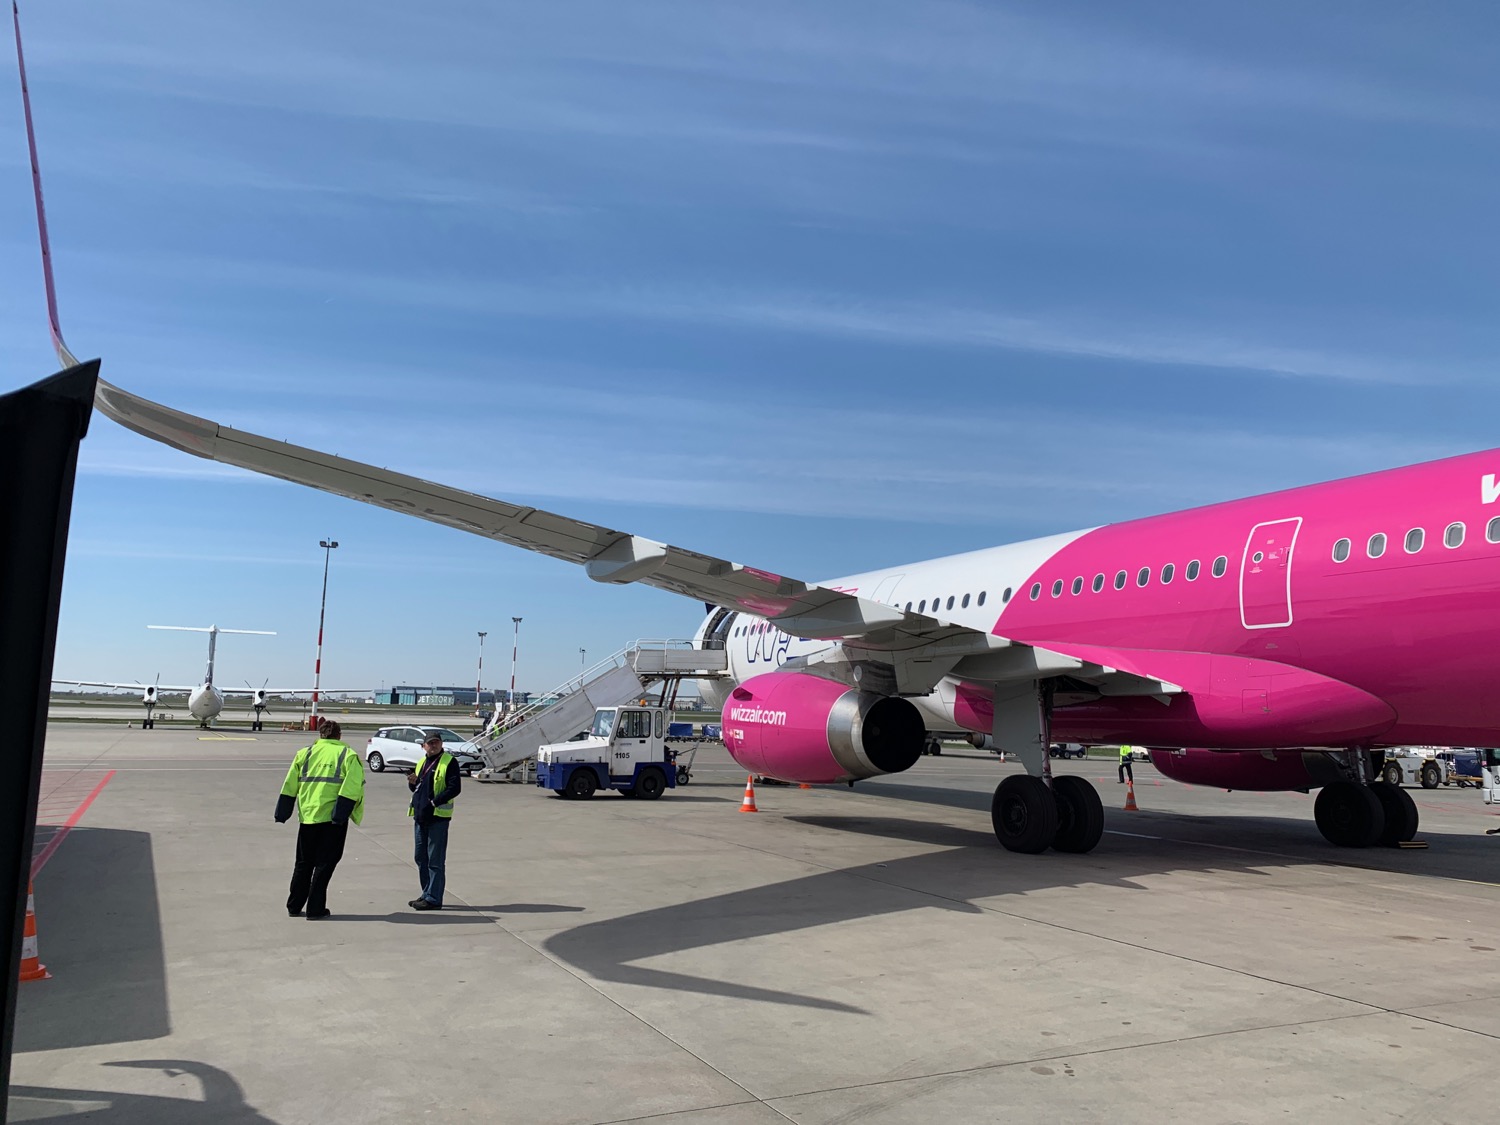 a pink and white airplane on a tarmac